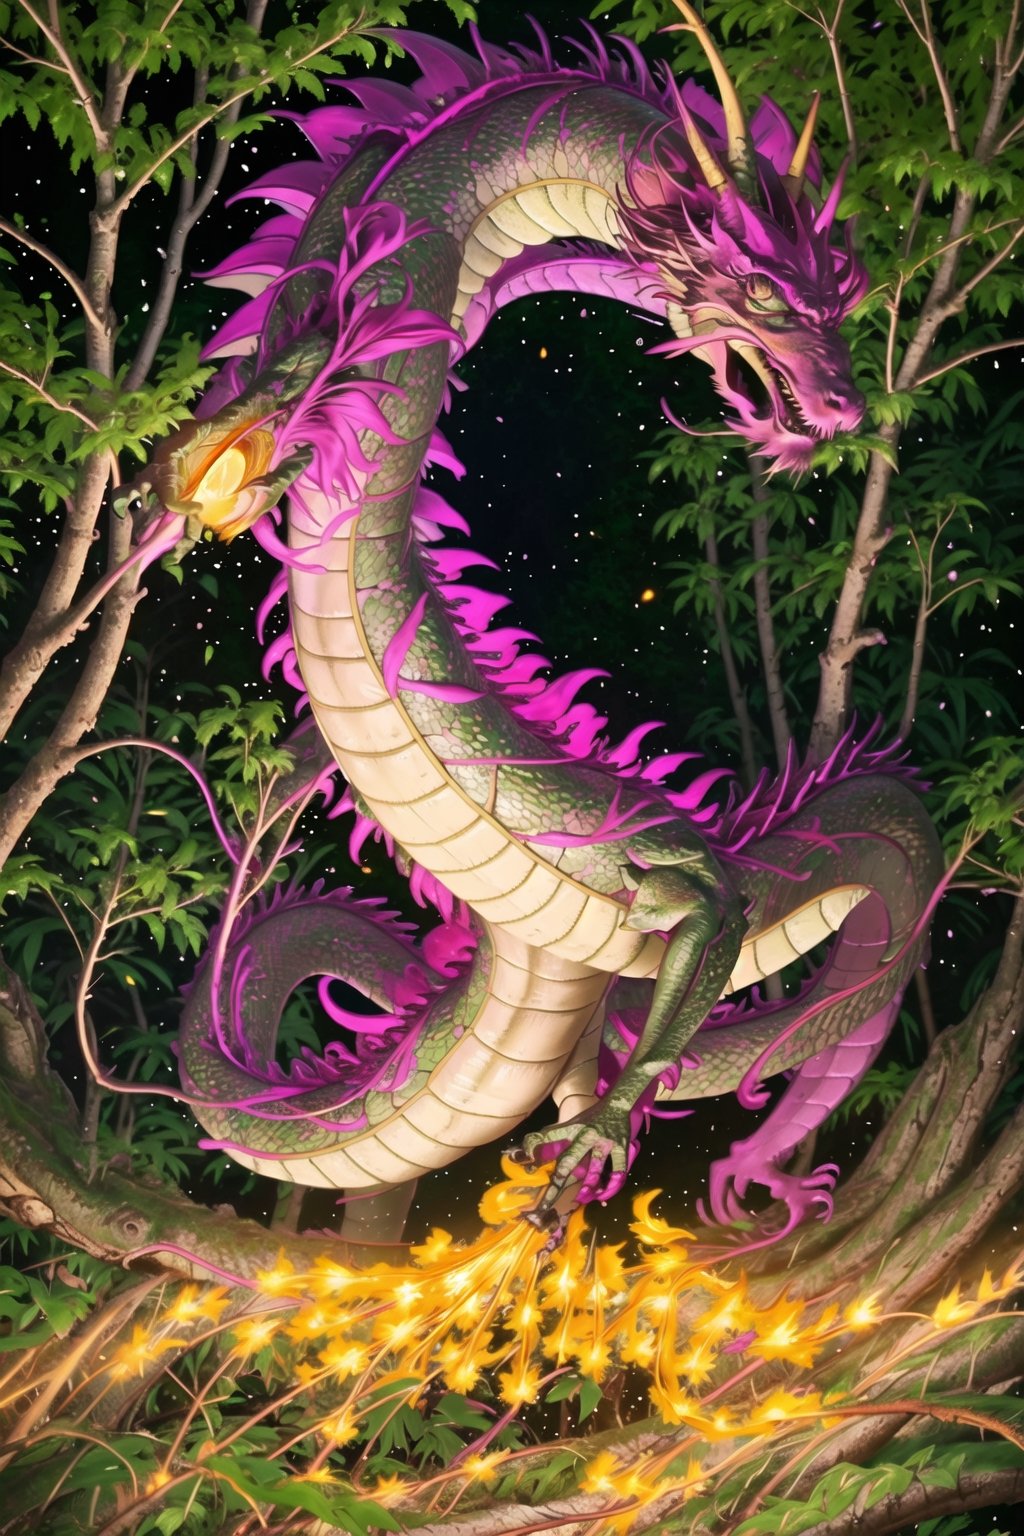 A pink dragon running through a vibrant forest, breathing bursts of sparkling fire, with scales glistening in the sunlight. The dragon's wings are spread wide and its tail coils dynamically in the air. The scene is rendered in a realistic style with ultra-fine painting details that capture the dragon's every scale and the texture of the forest foliage. The colors are vivid, with a warm color palette dominated by shades of pink, orange, and green. The lighting is soft, casting a warm glow that accentuates the dragon's form and brings a magical atmosphere to the scene. The scene is of the highest quality, with 4K resolution and ultra-detailed rendering that captures every intricate detail.